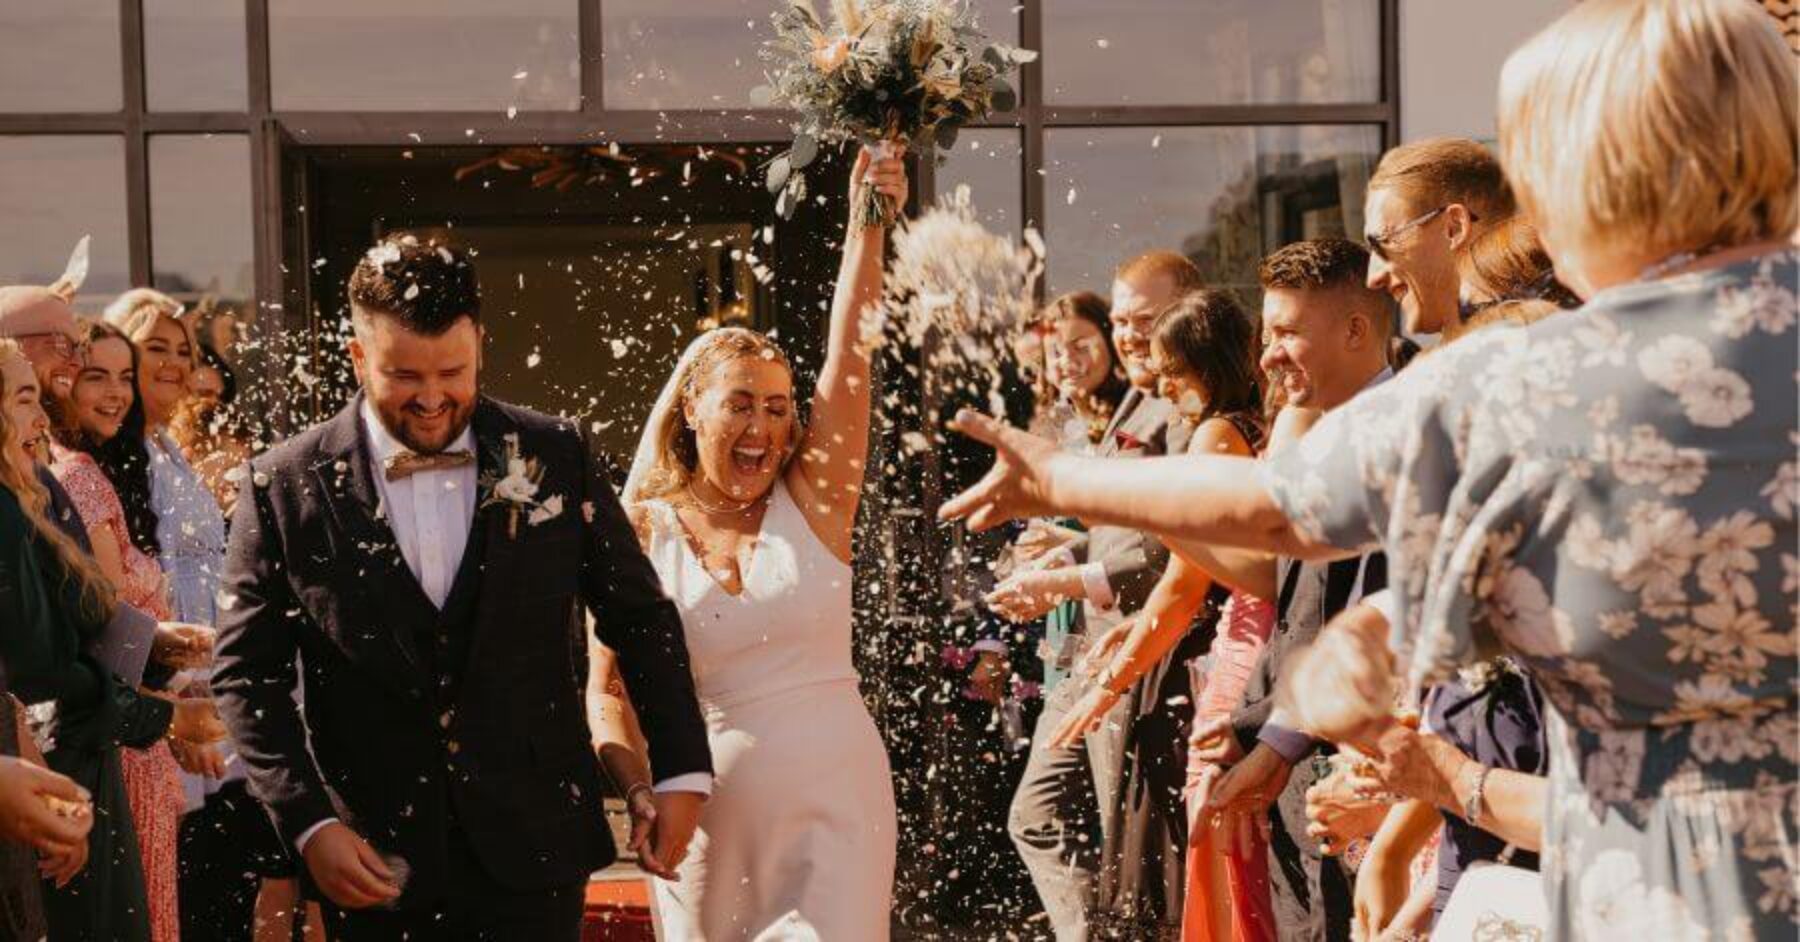 Bride and groom leaving the altar, celebrating with loved ones with confetti in the air.